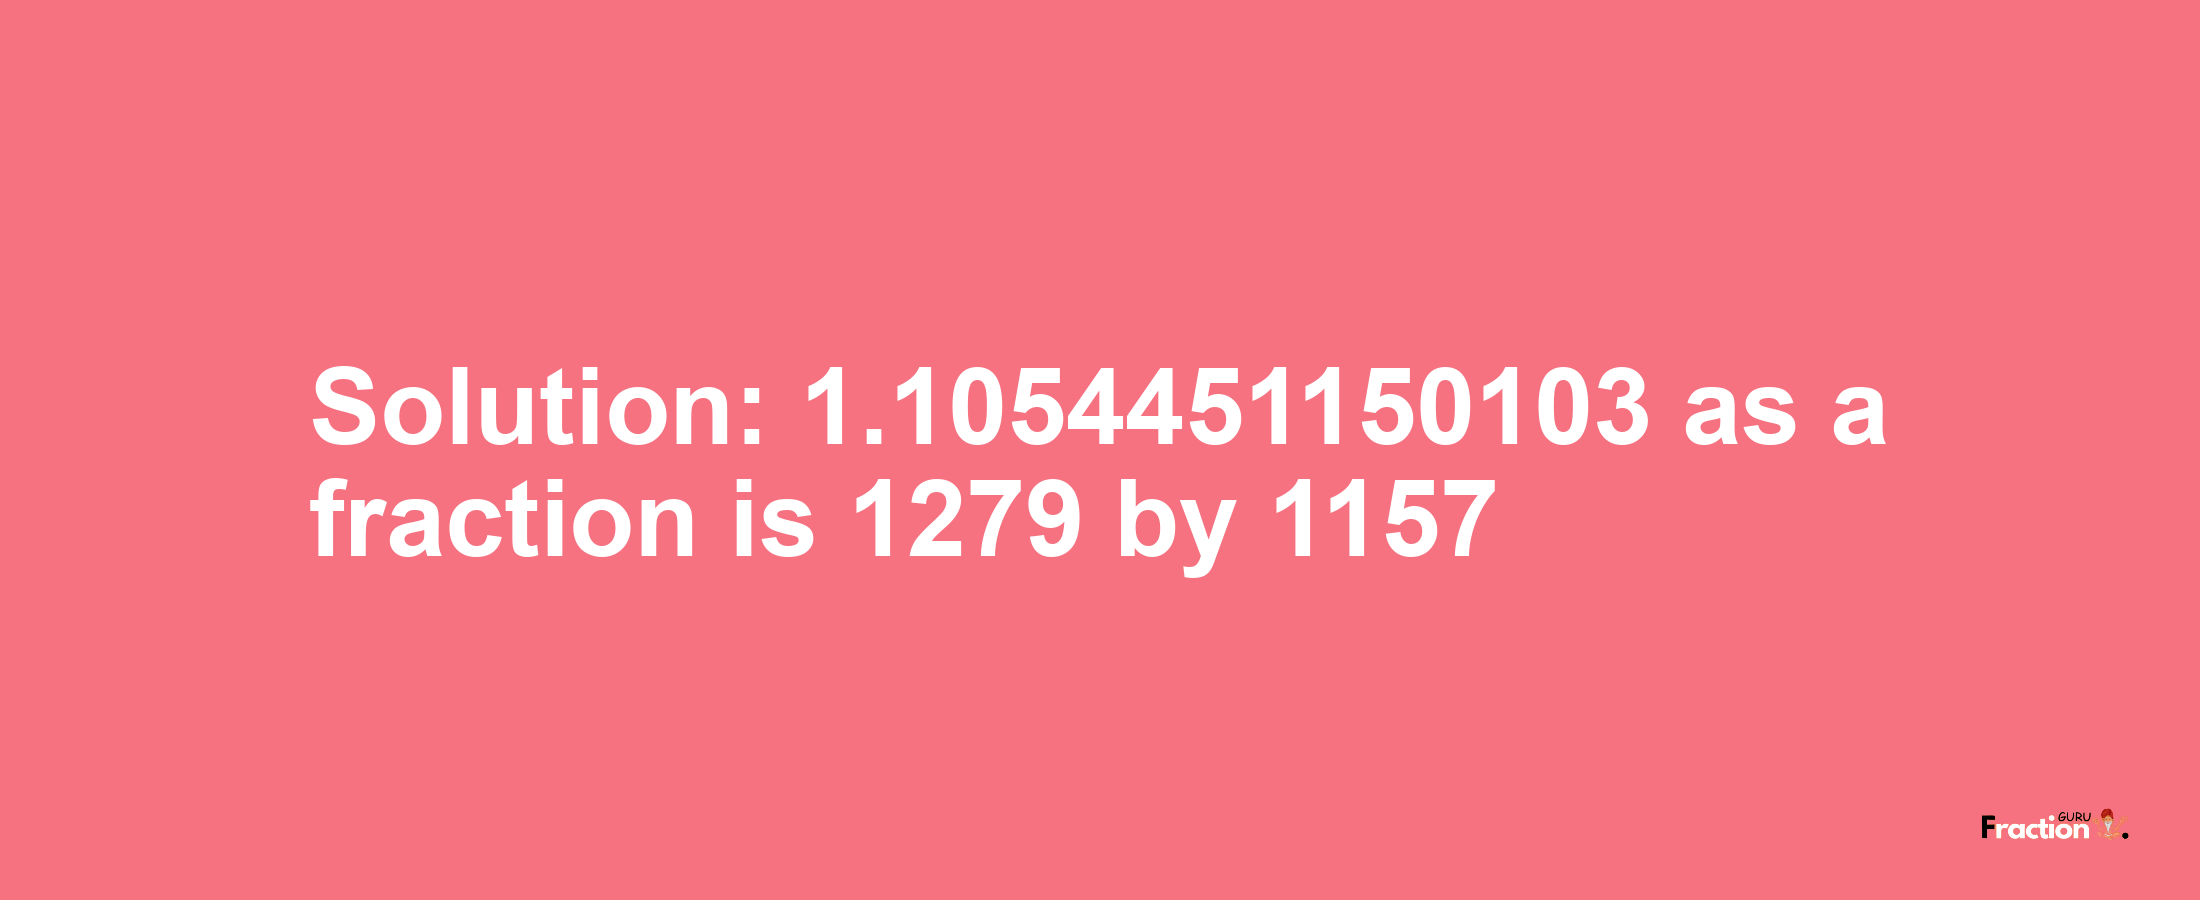 Solution:1.1054451150103 as a fraction is 1279/1157